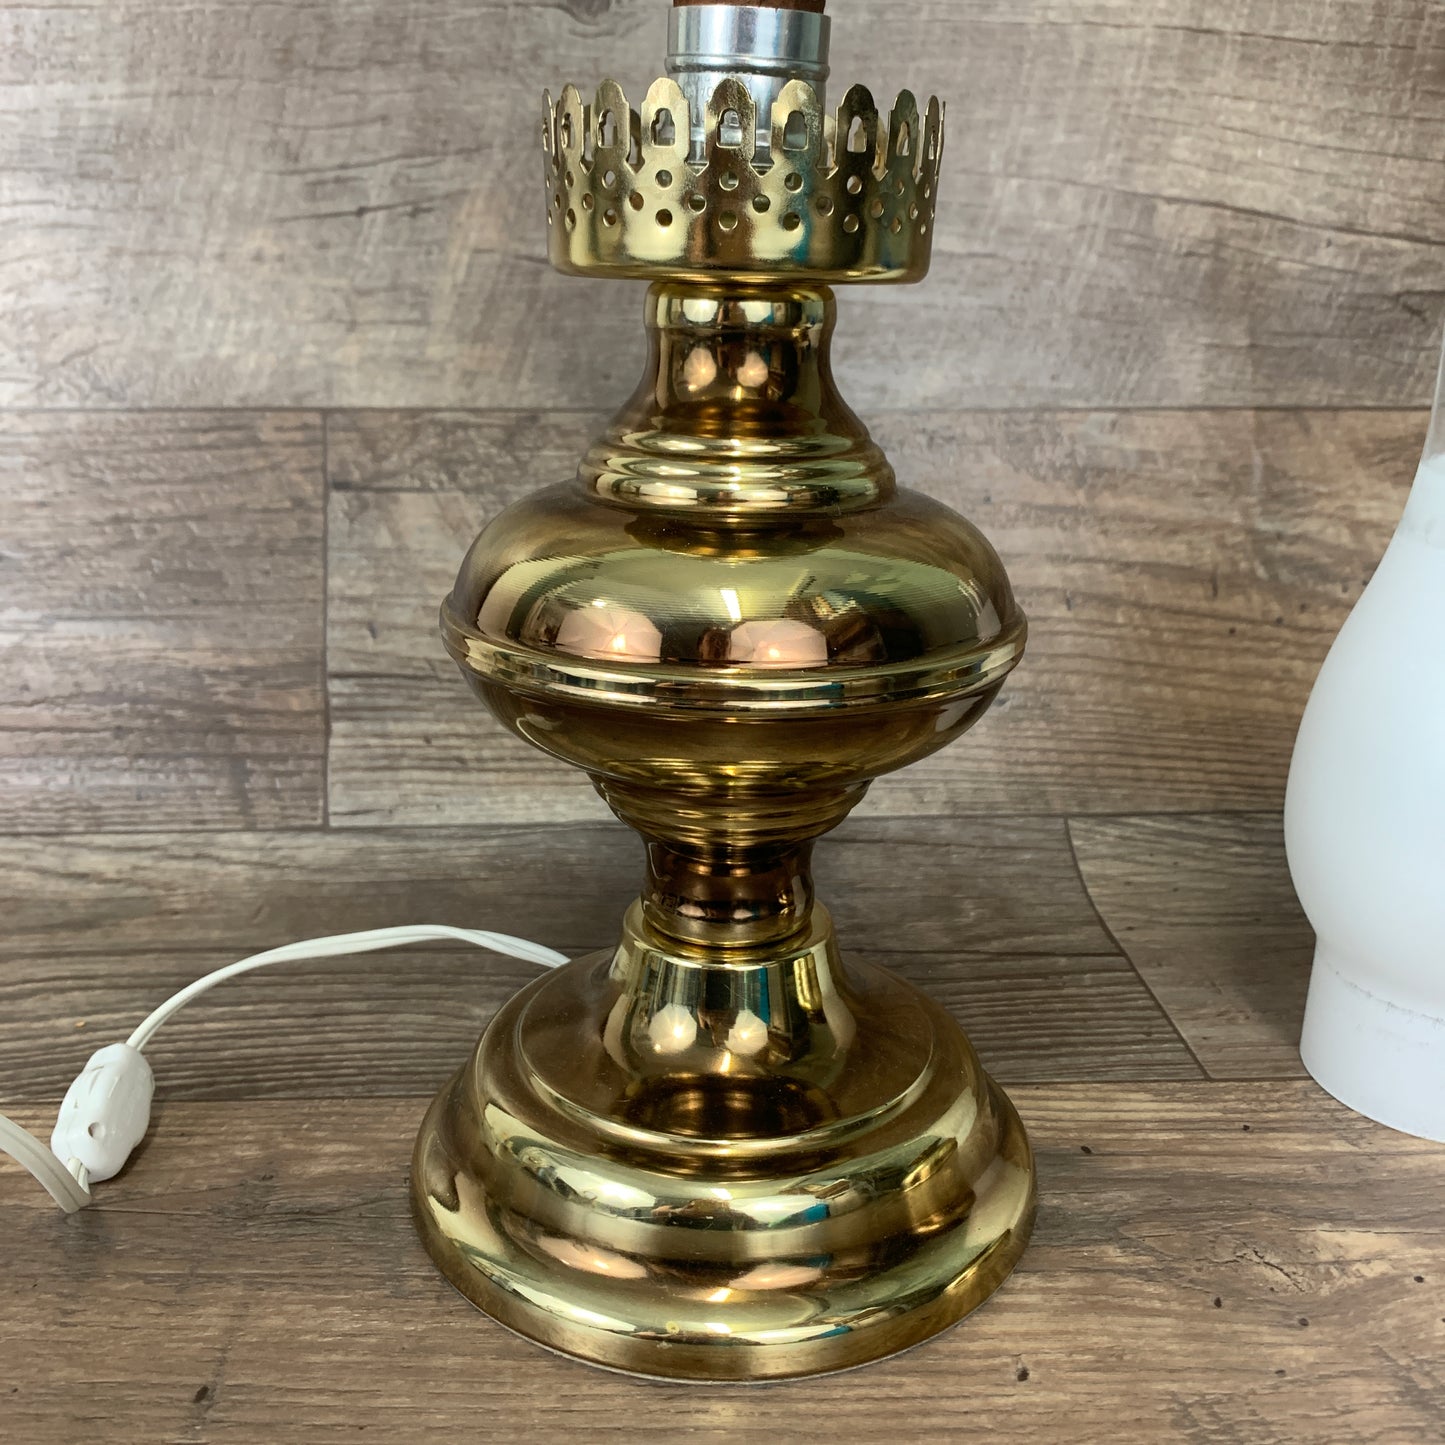 Vintage Brass Lamp, Electric Oil Lamp Style, Vintage Table Lamp